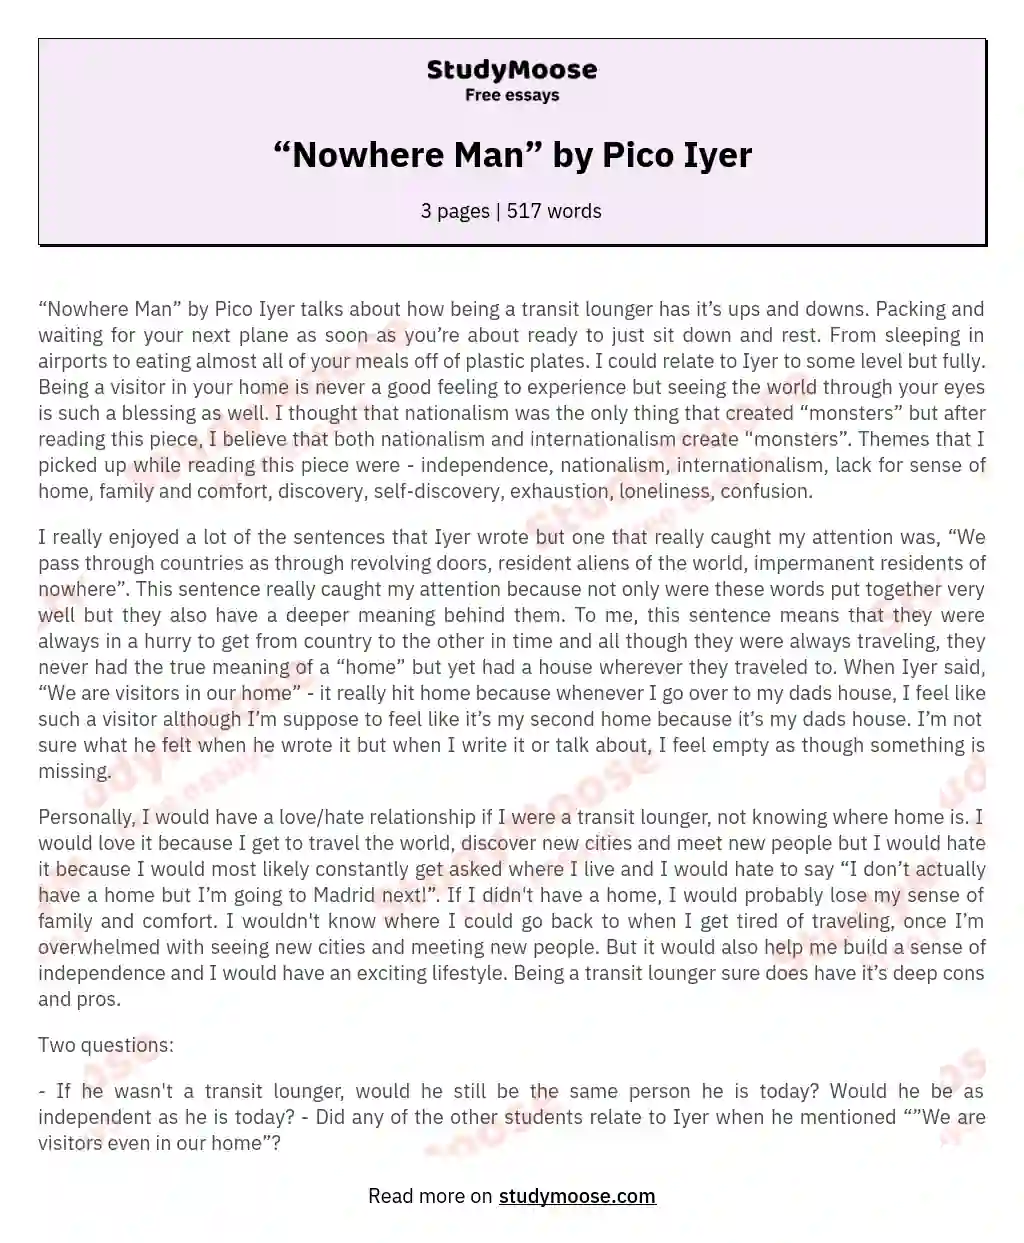 “Nowhere Man” by Pico Iyer essay